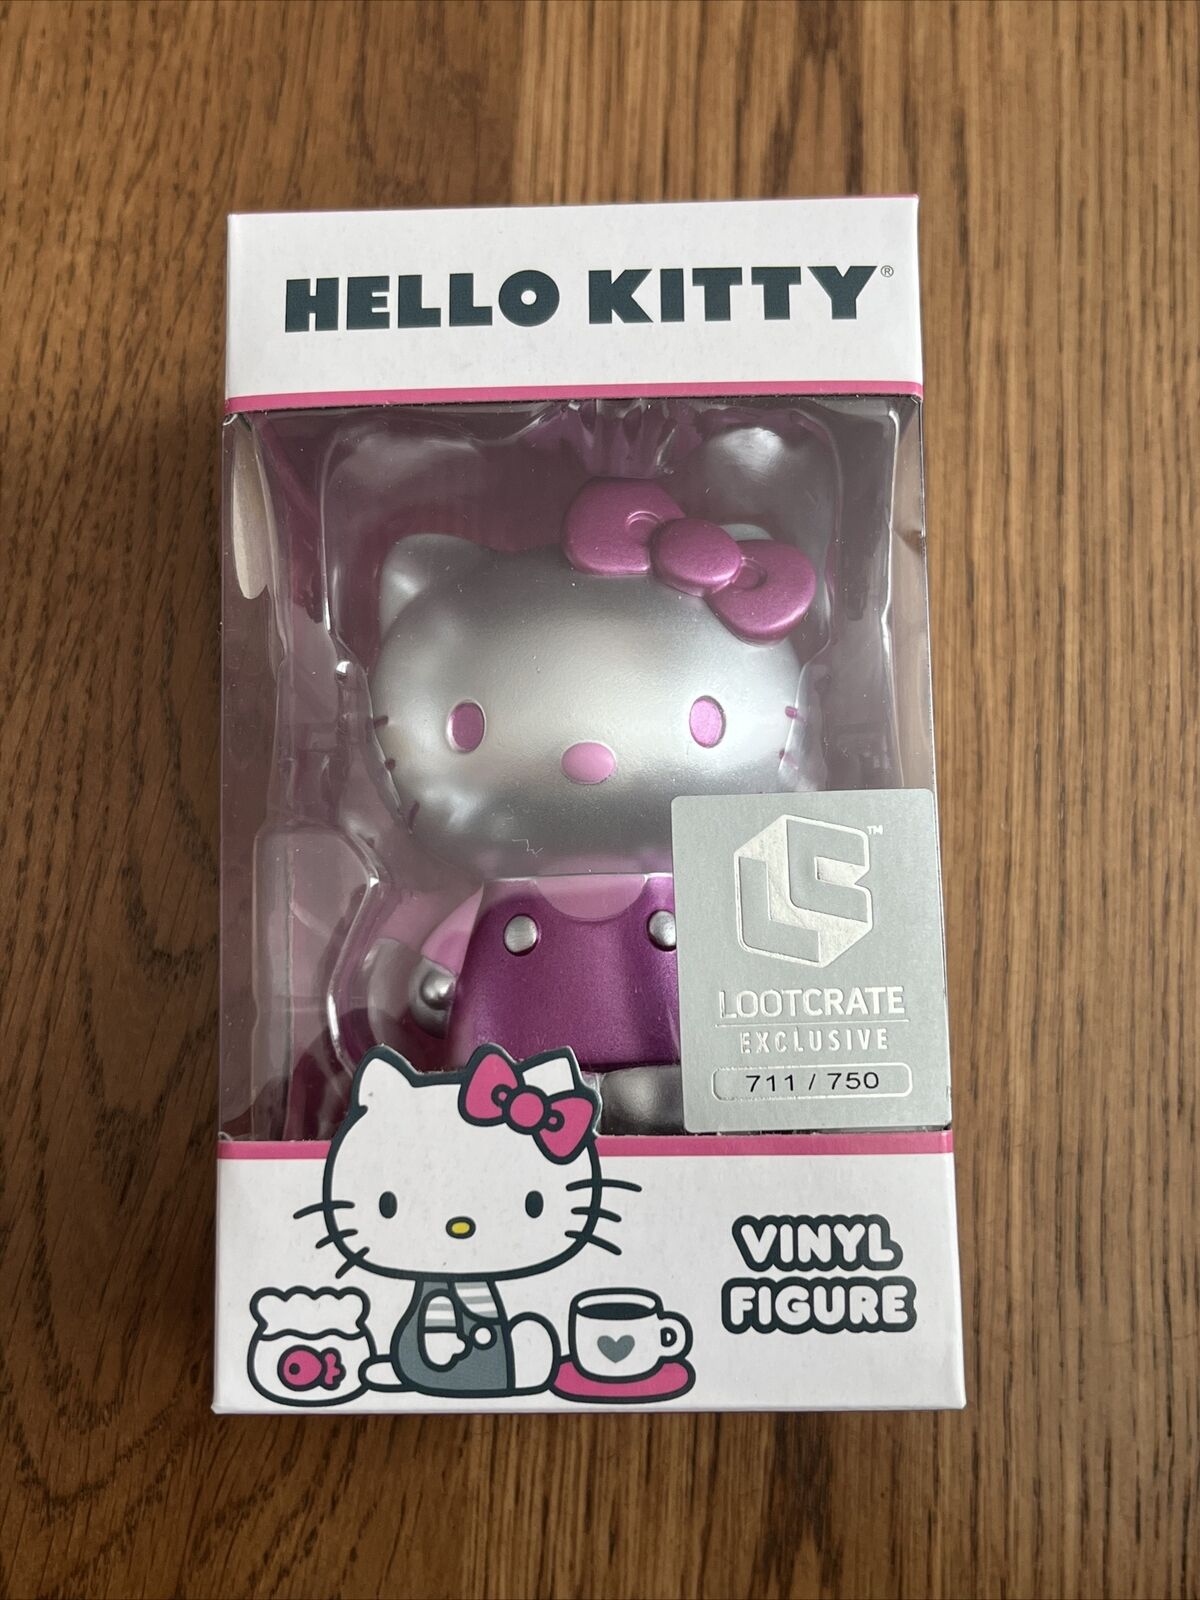 NEW Sealed SDCC 2019 LOOTCRATE EXCLUSIVE HELLO KITTY Vinyl Figure